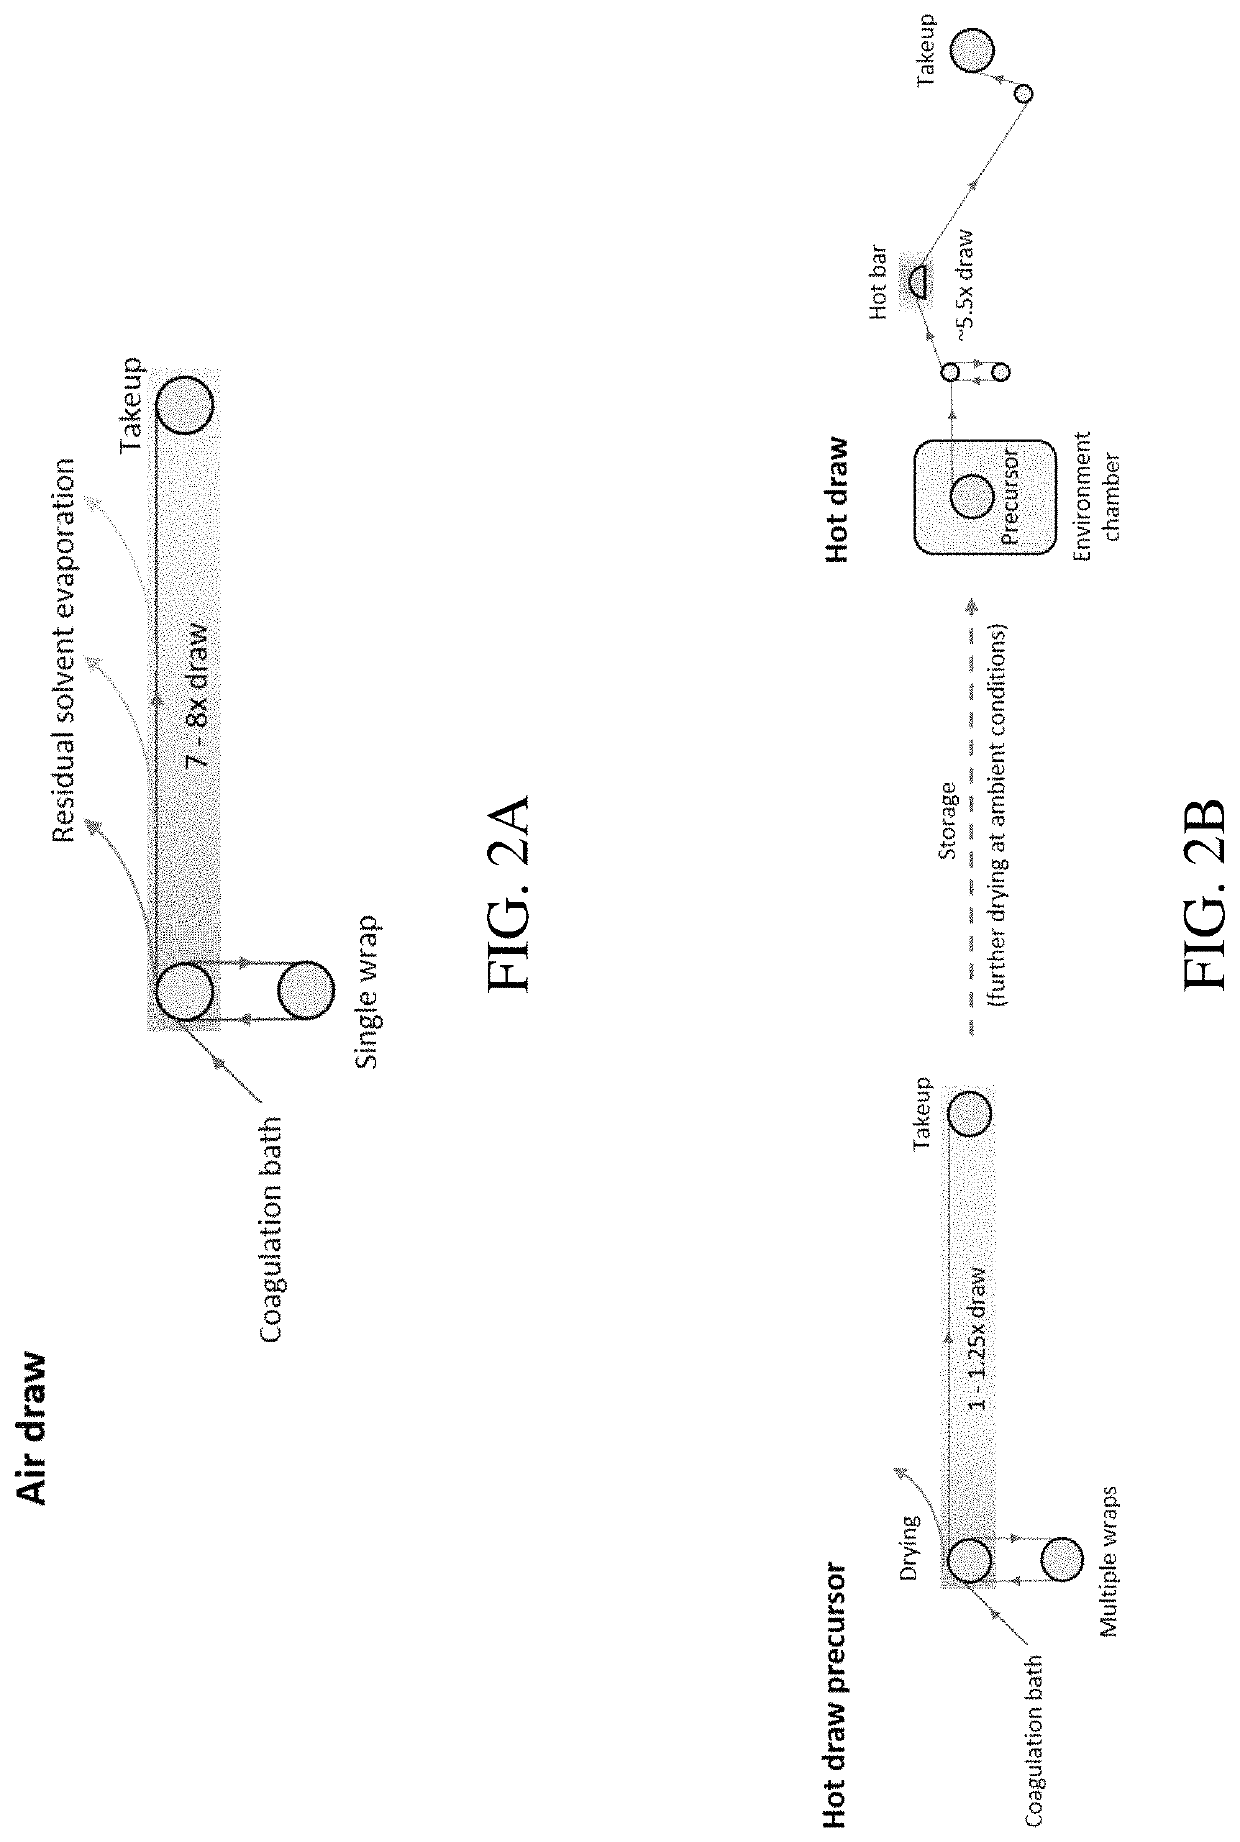 Methods of generating highly-crystalline recombinant spider silk protein fibers